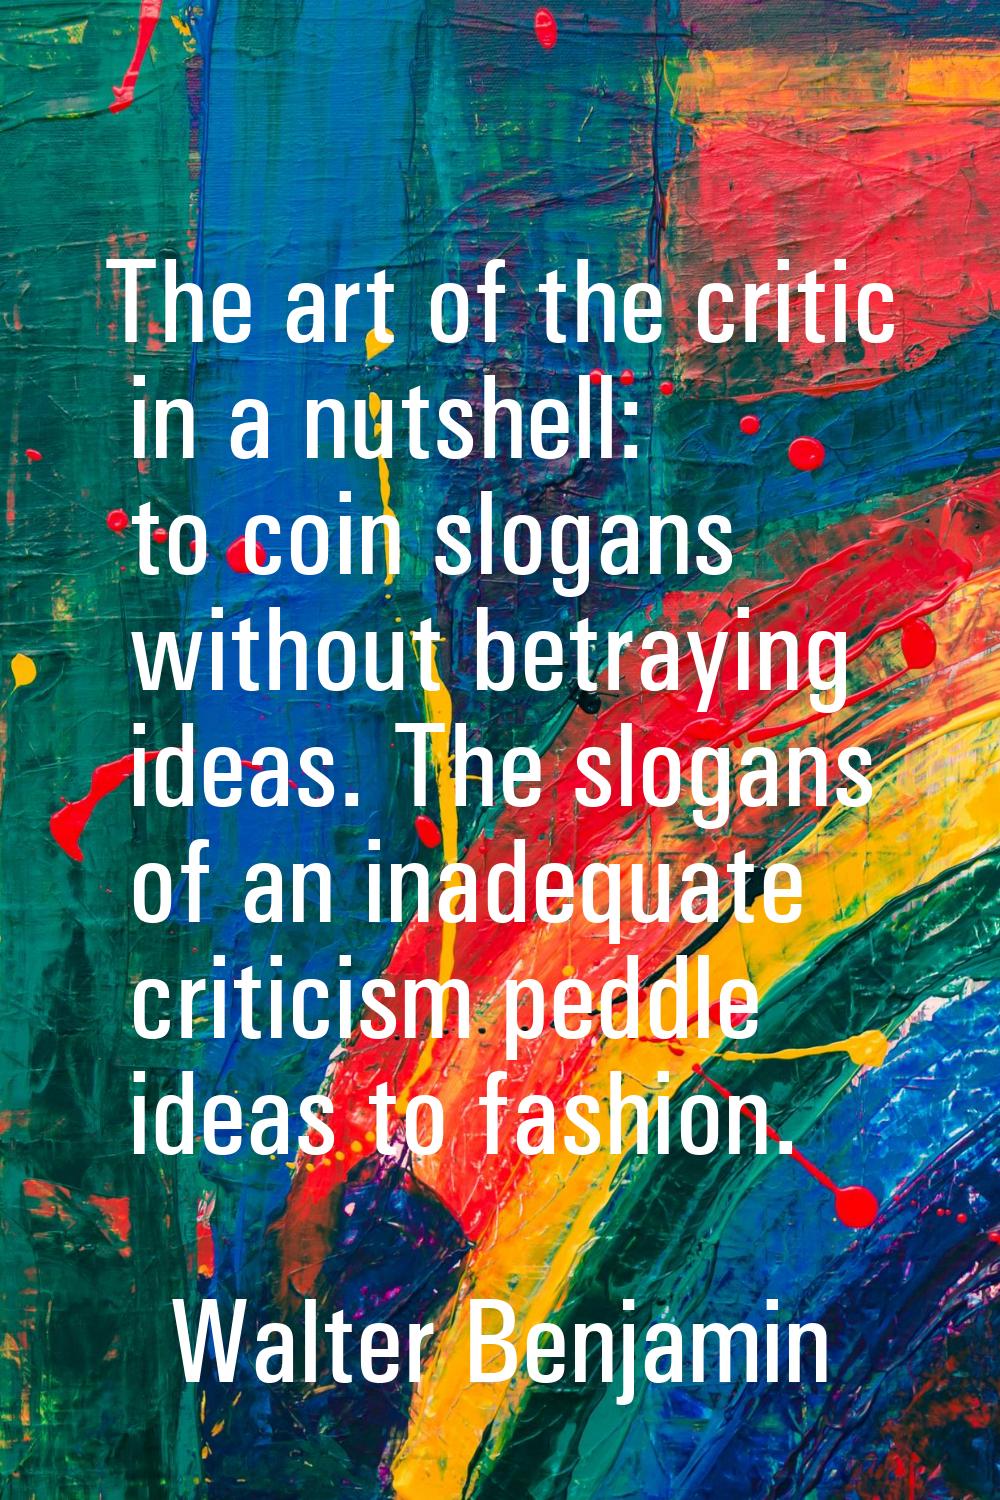 The art of the critic in a nutshell: to coin slogans without betraying ideas. The slogans of an ina